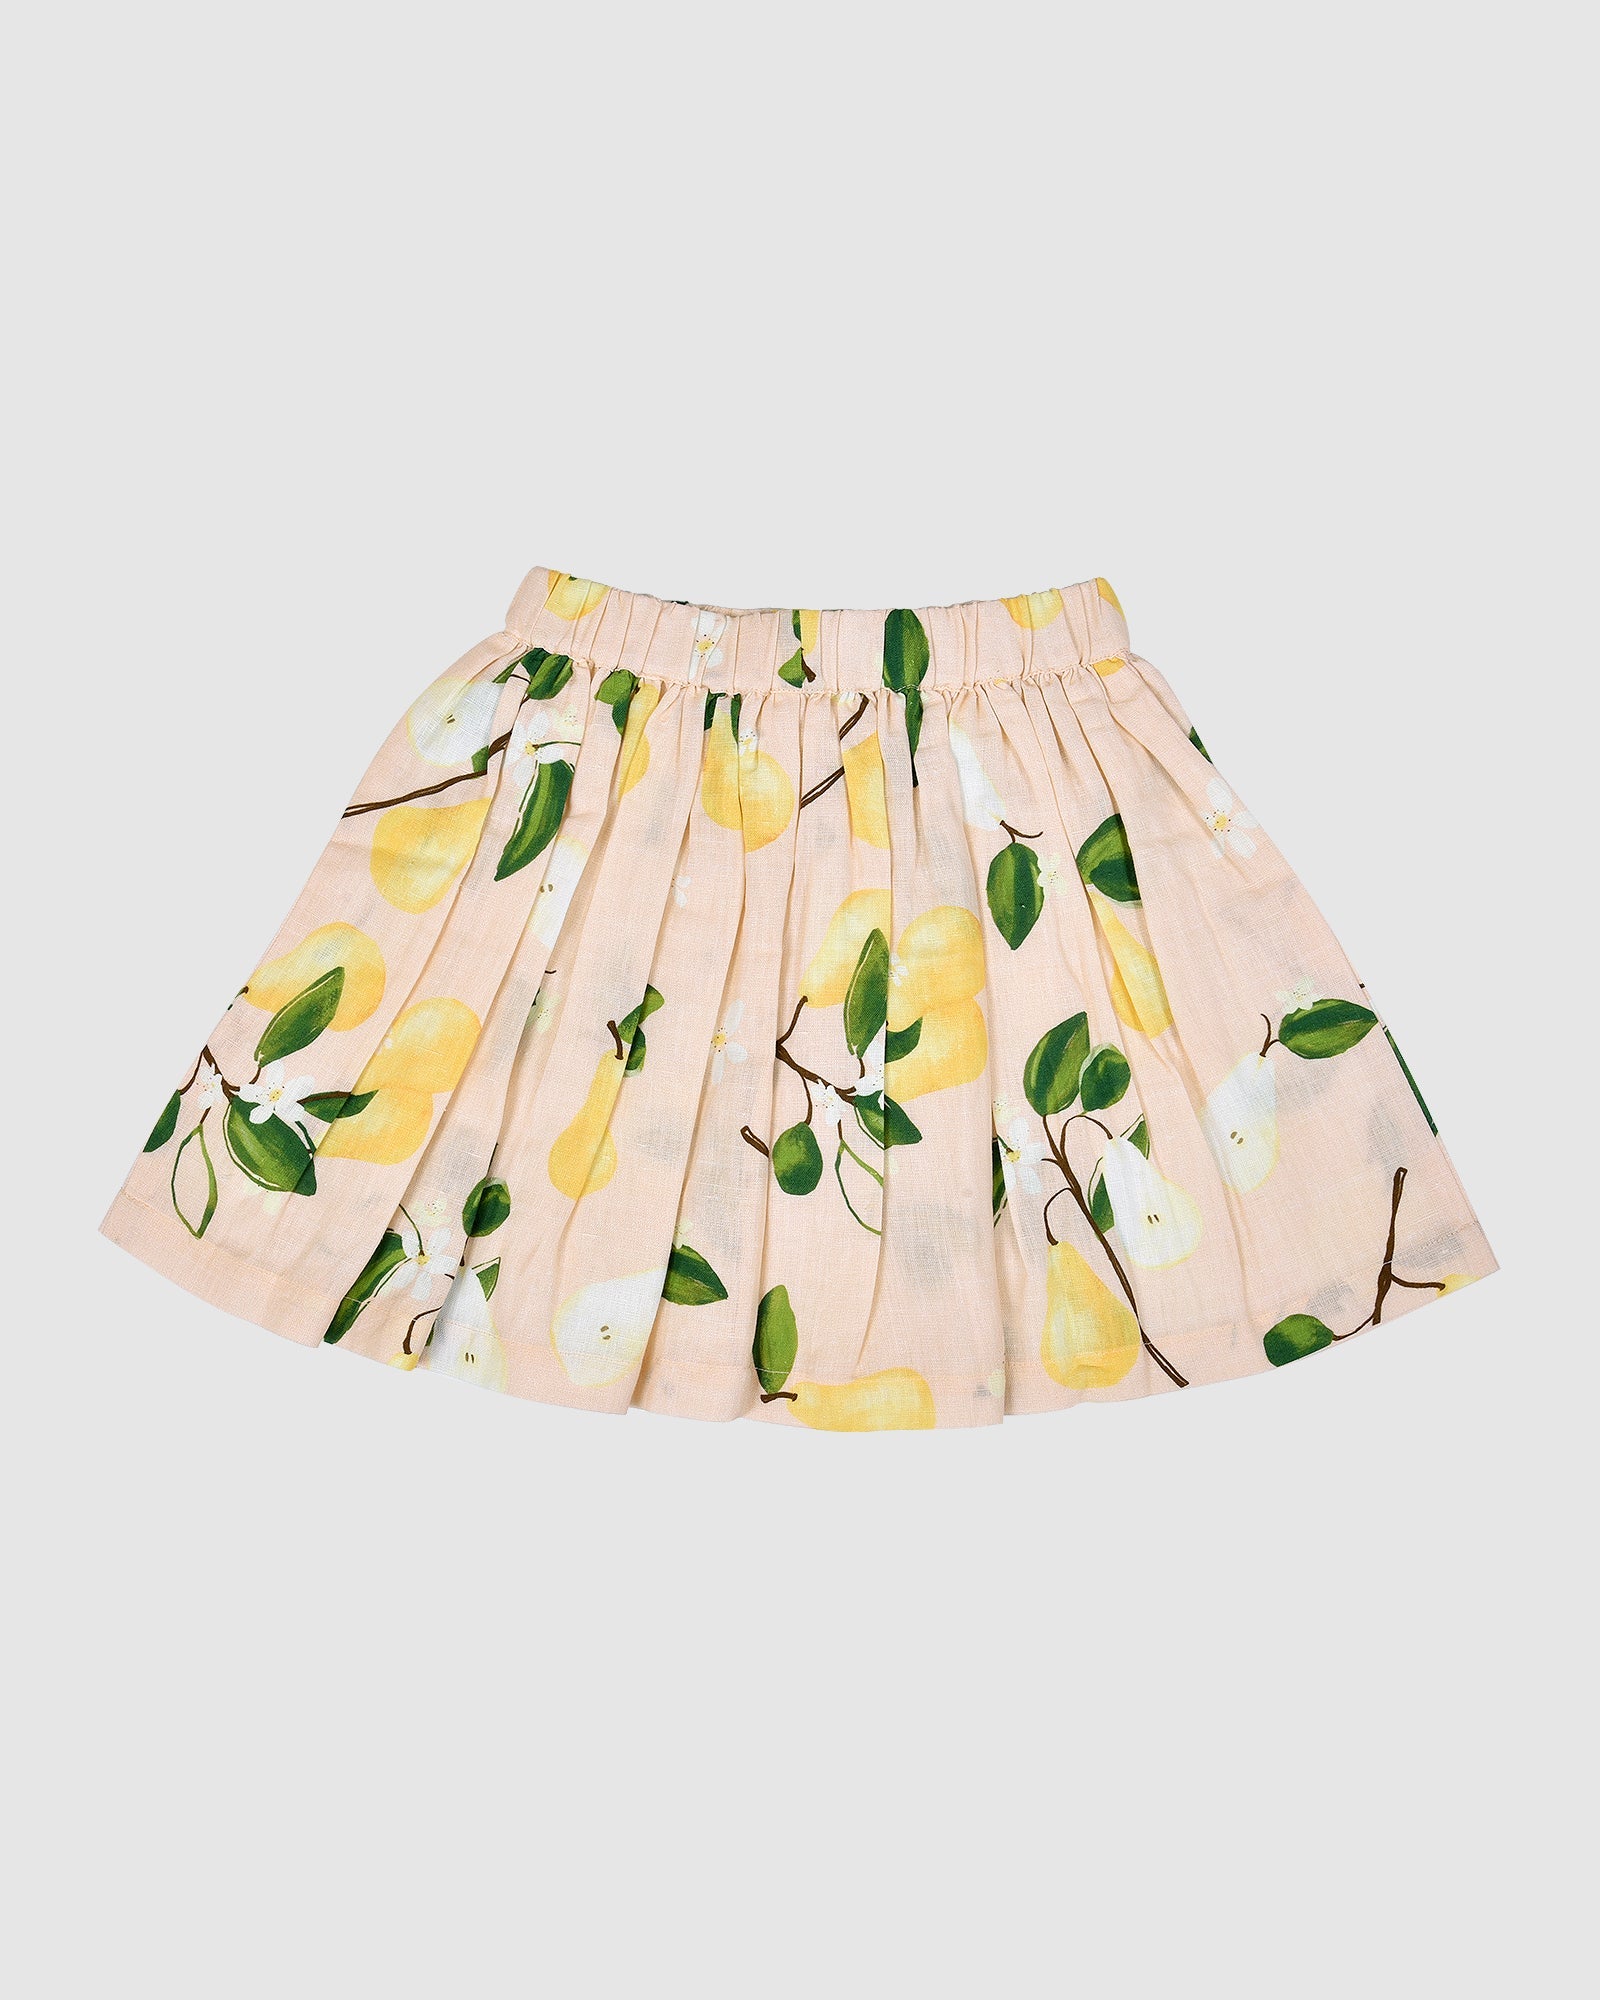 Alex and Ant Shelley Skirt - Pear